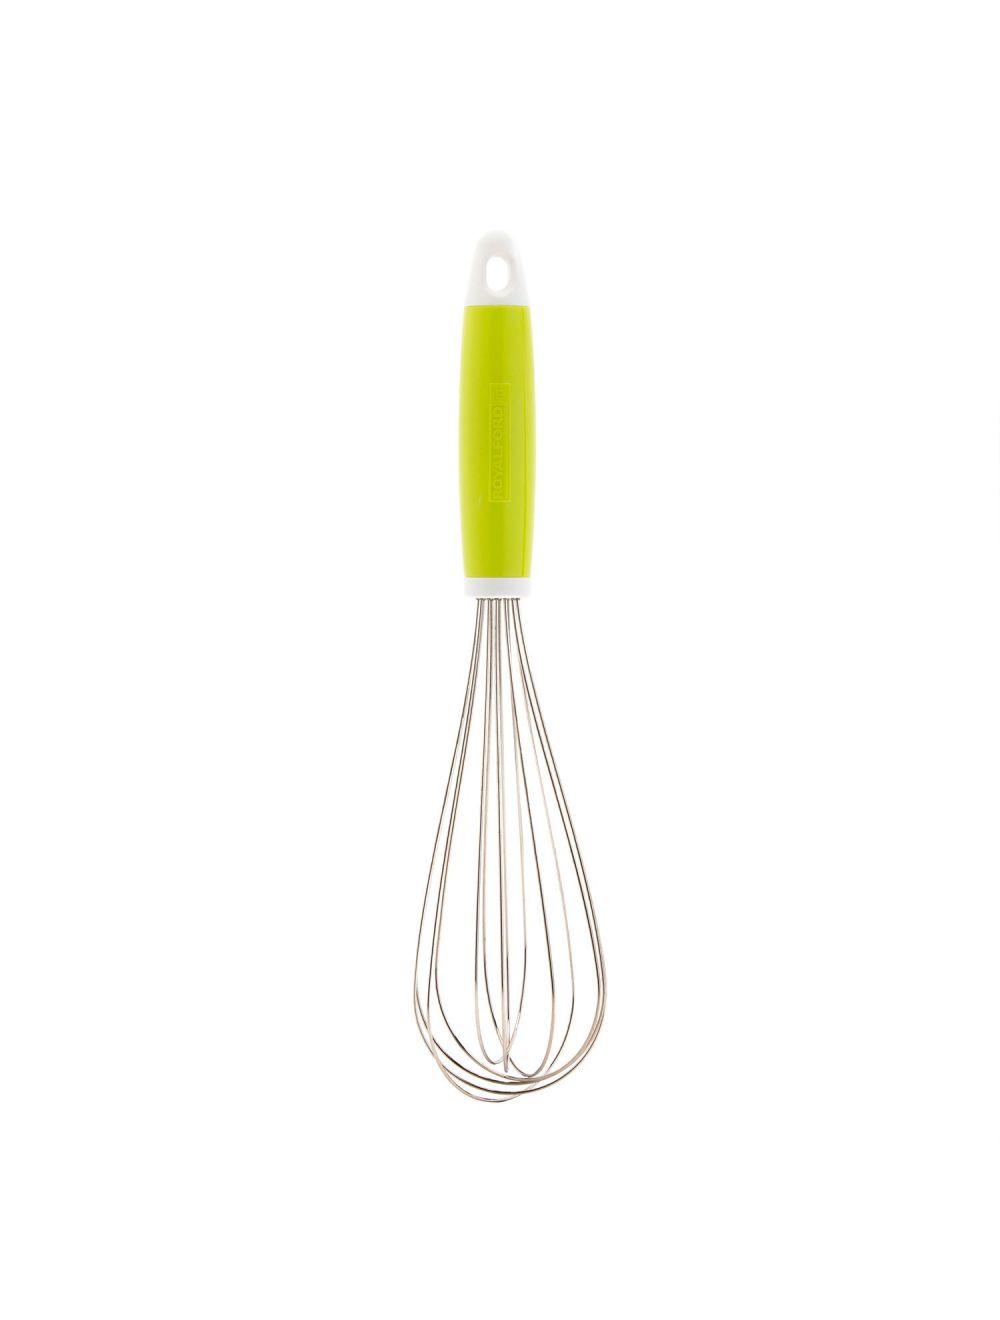 Royalford RF6315 Stainless Steel Balloon Whisk with Plastic Handle 10 inch